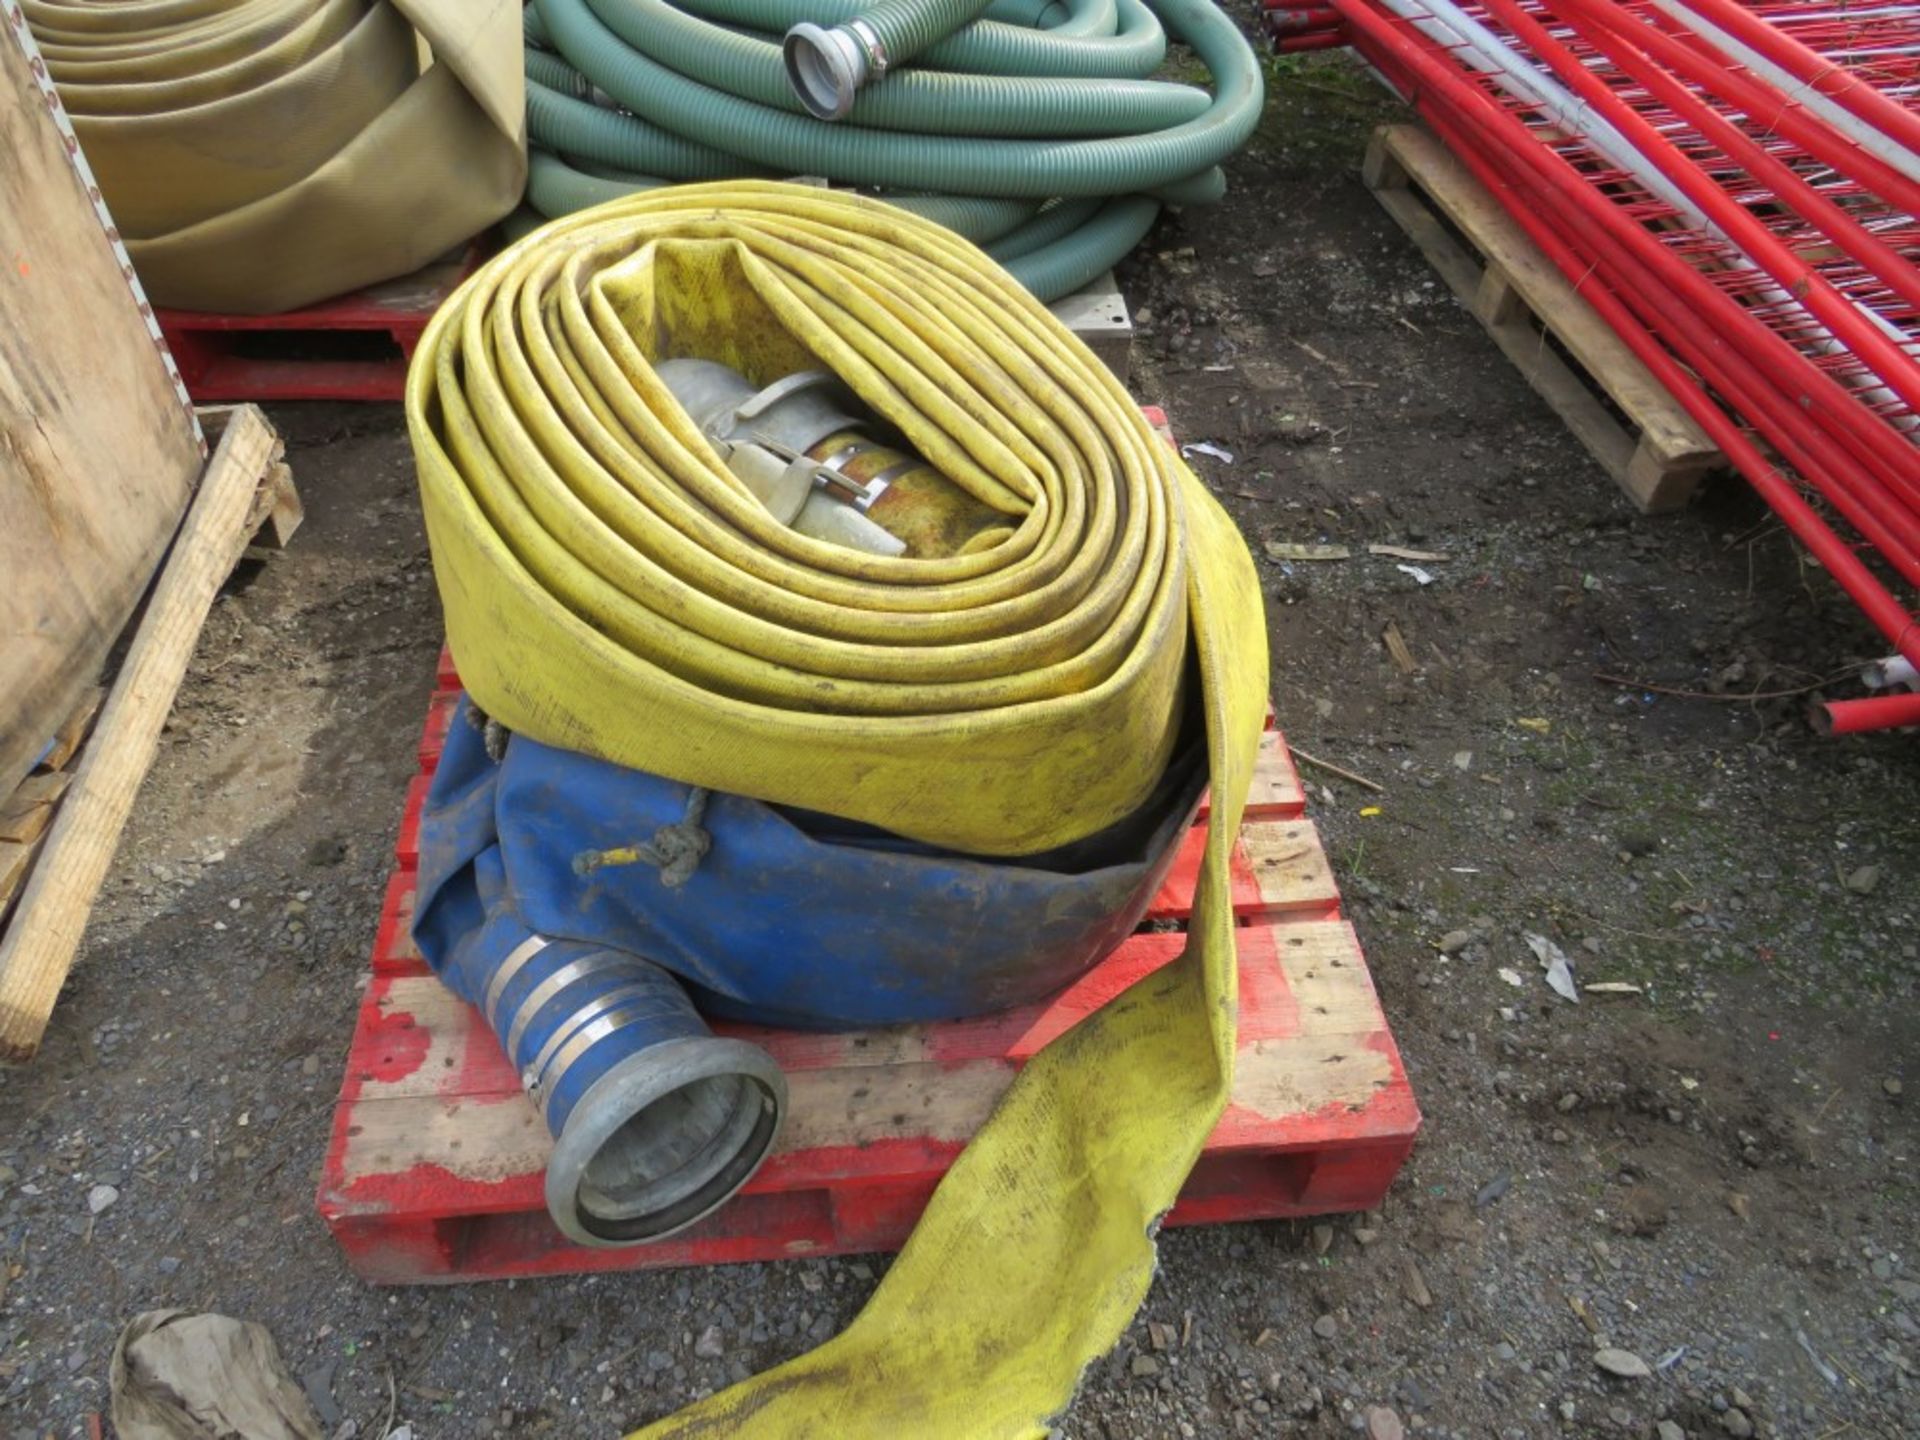 2 HOSES BLUE & YELLOW (DIRECT UNITED UTILITIES WATER) [+ VAT]